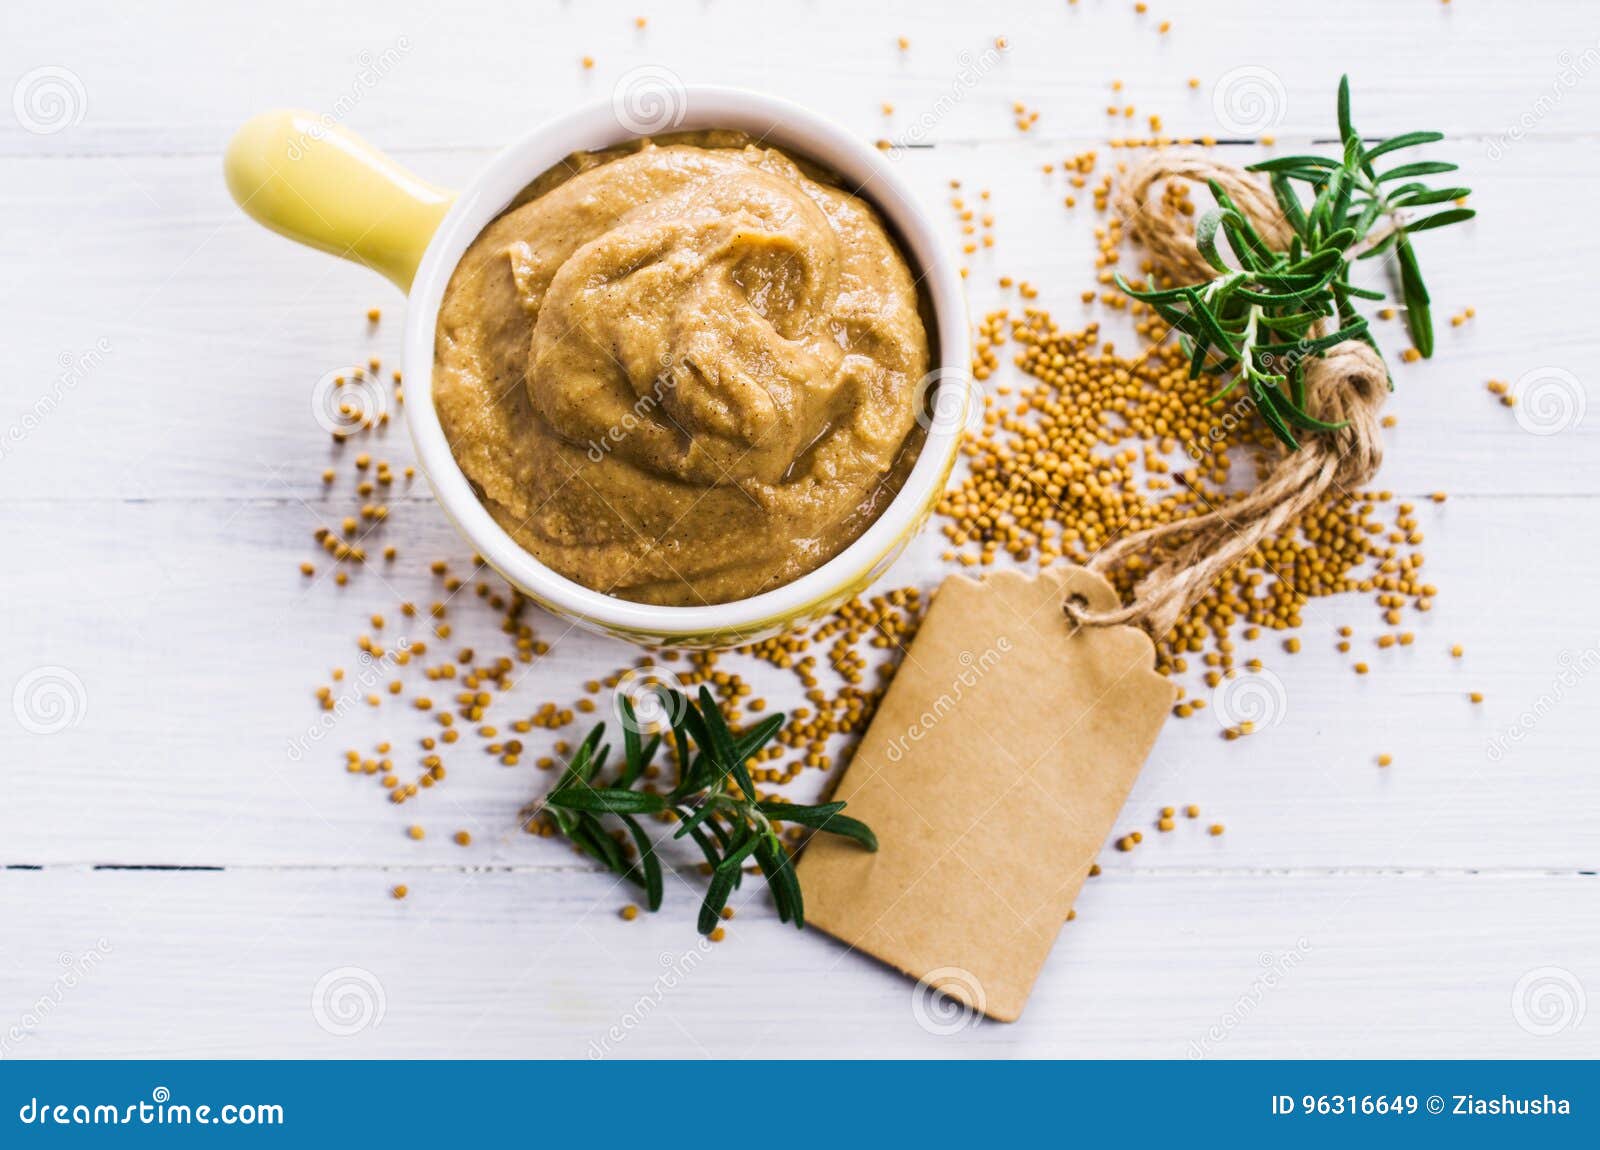 Homemade spicy mustard sauce wooden background. Selective focus.